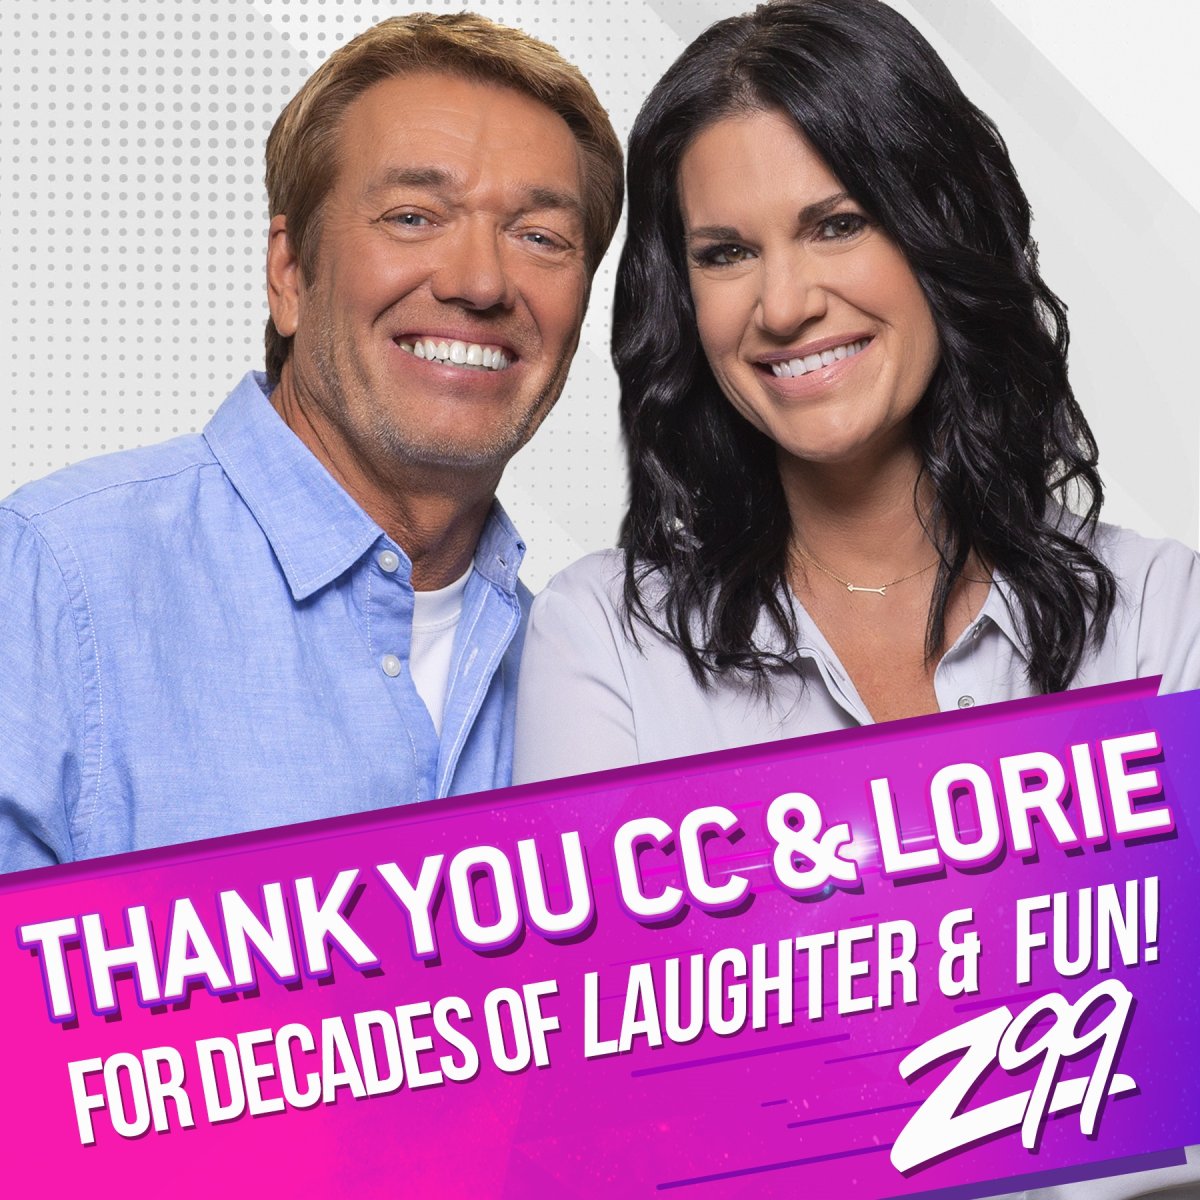 A date has not been determined yet for the last CC and Lorie morning broadcast on Z99. 